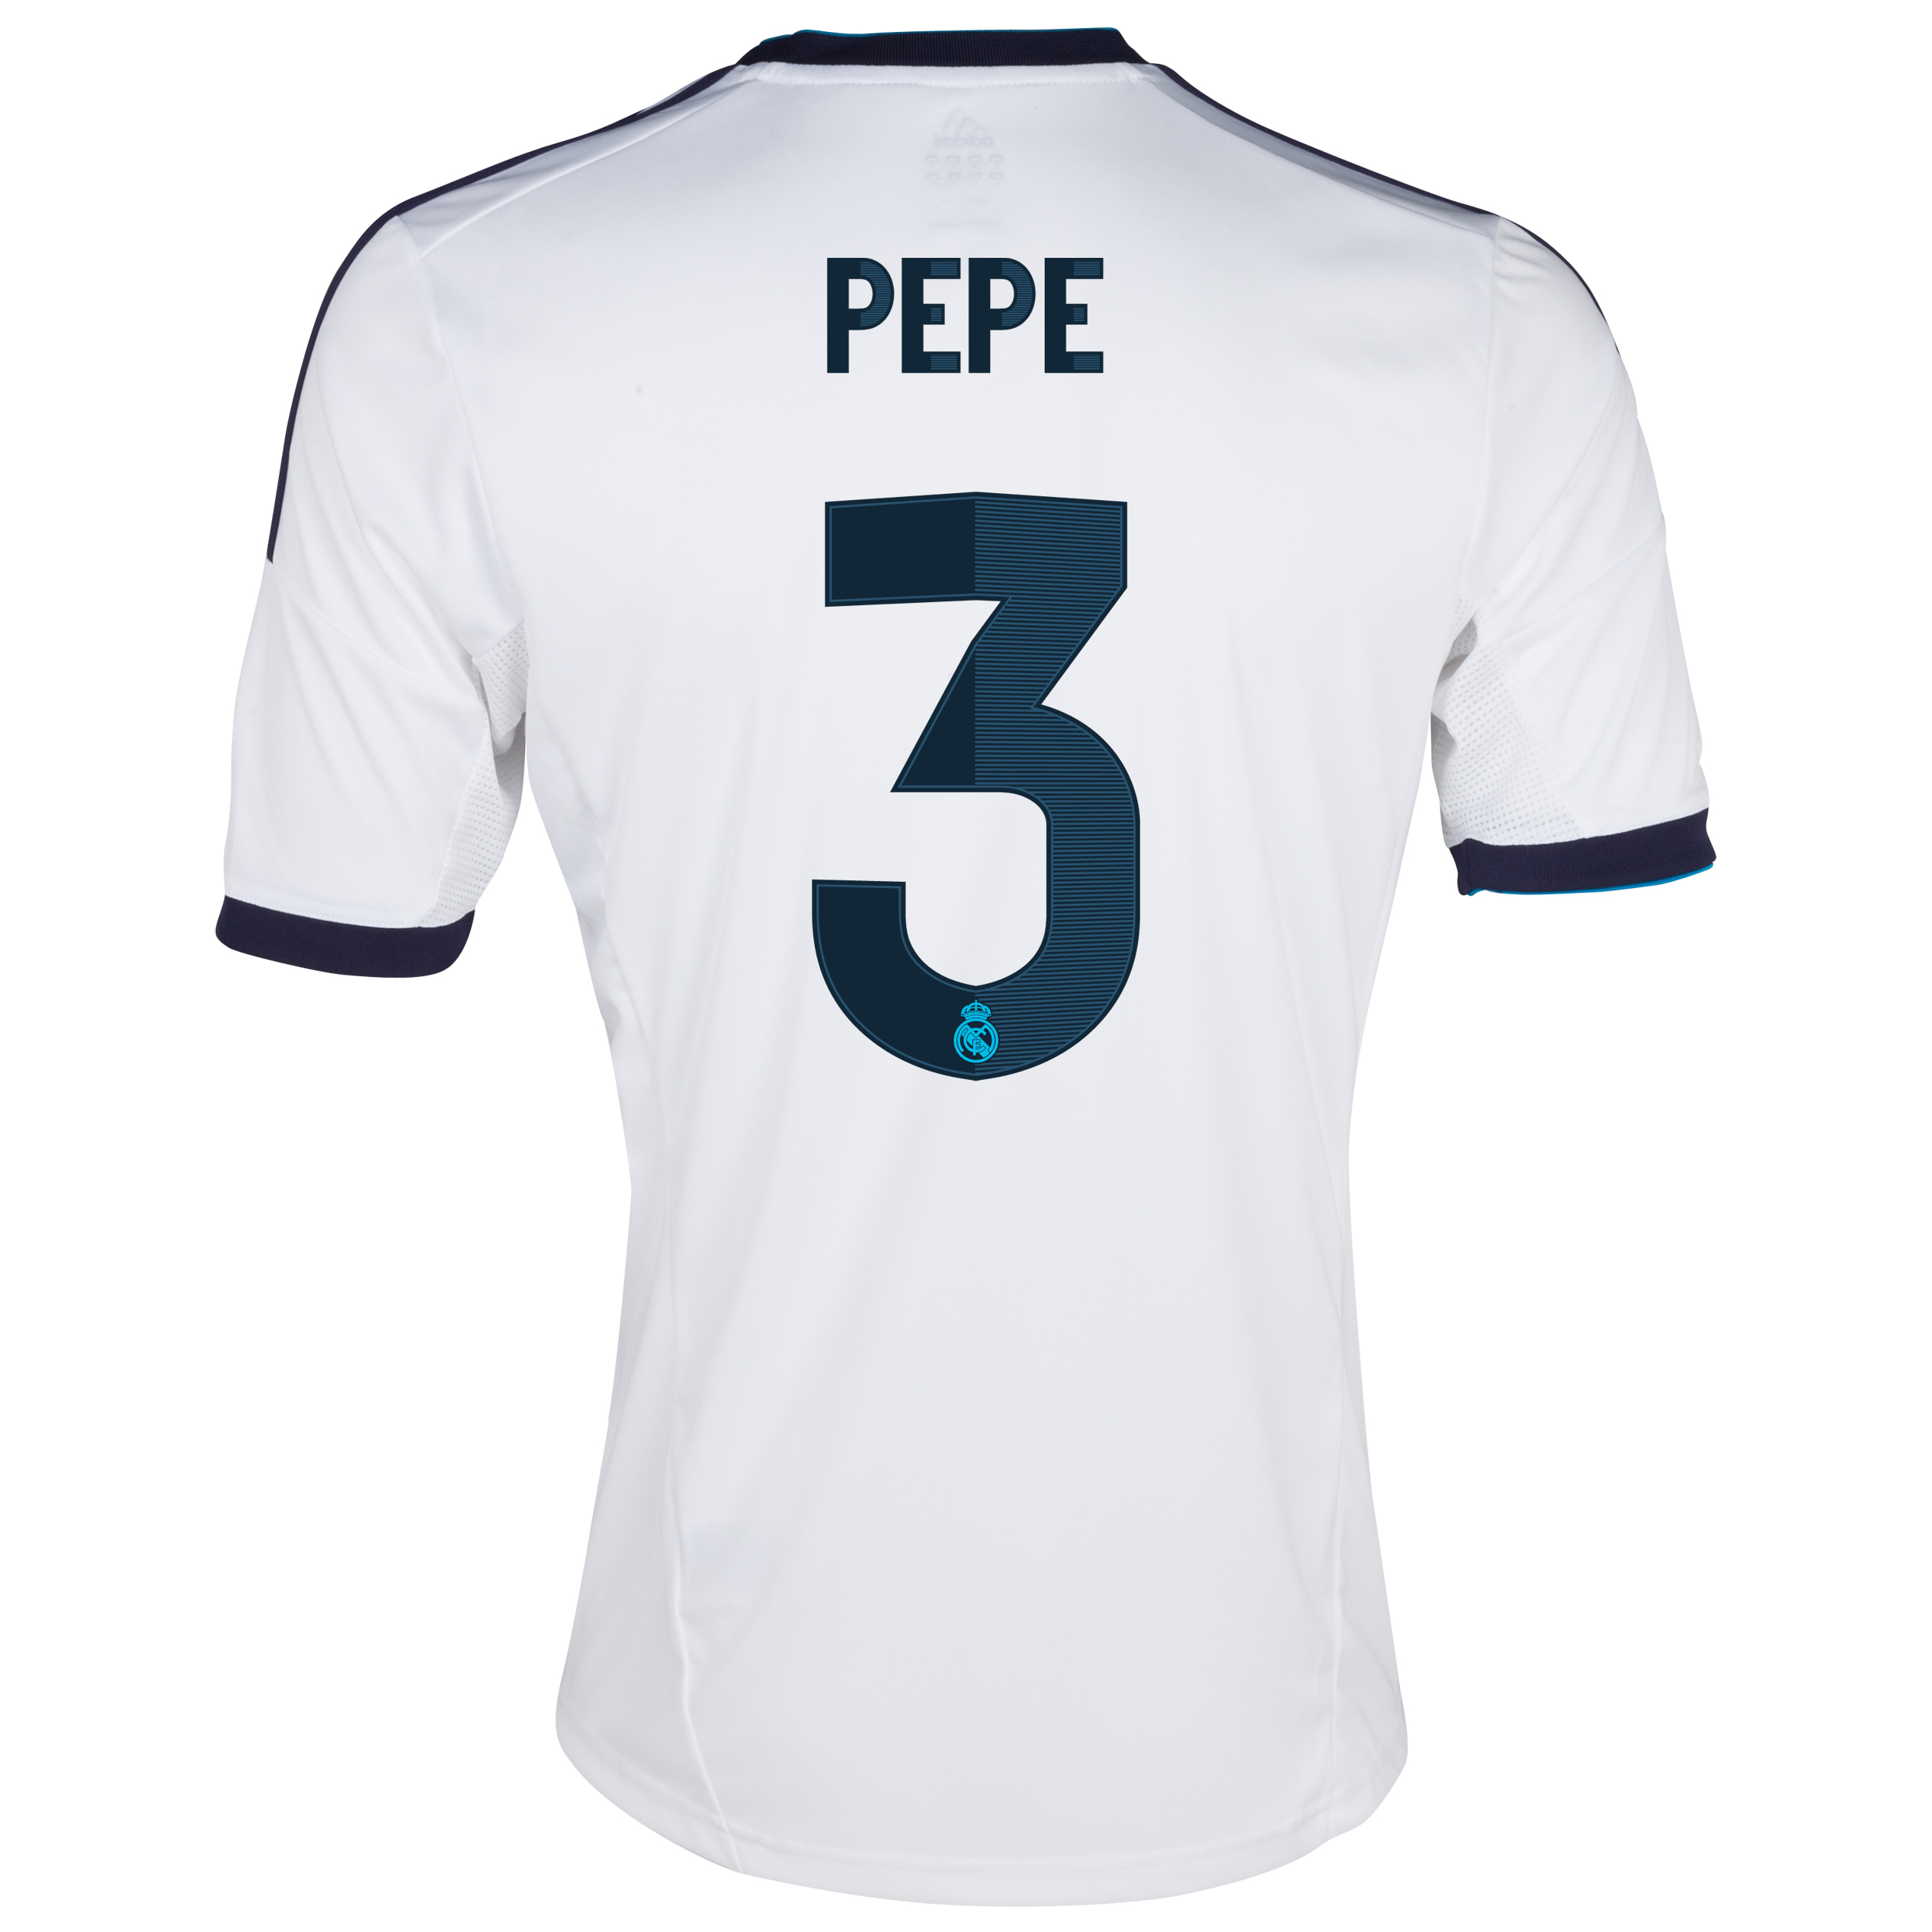 Download this Real Madrid Home Shirt With Pepe Printing picture